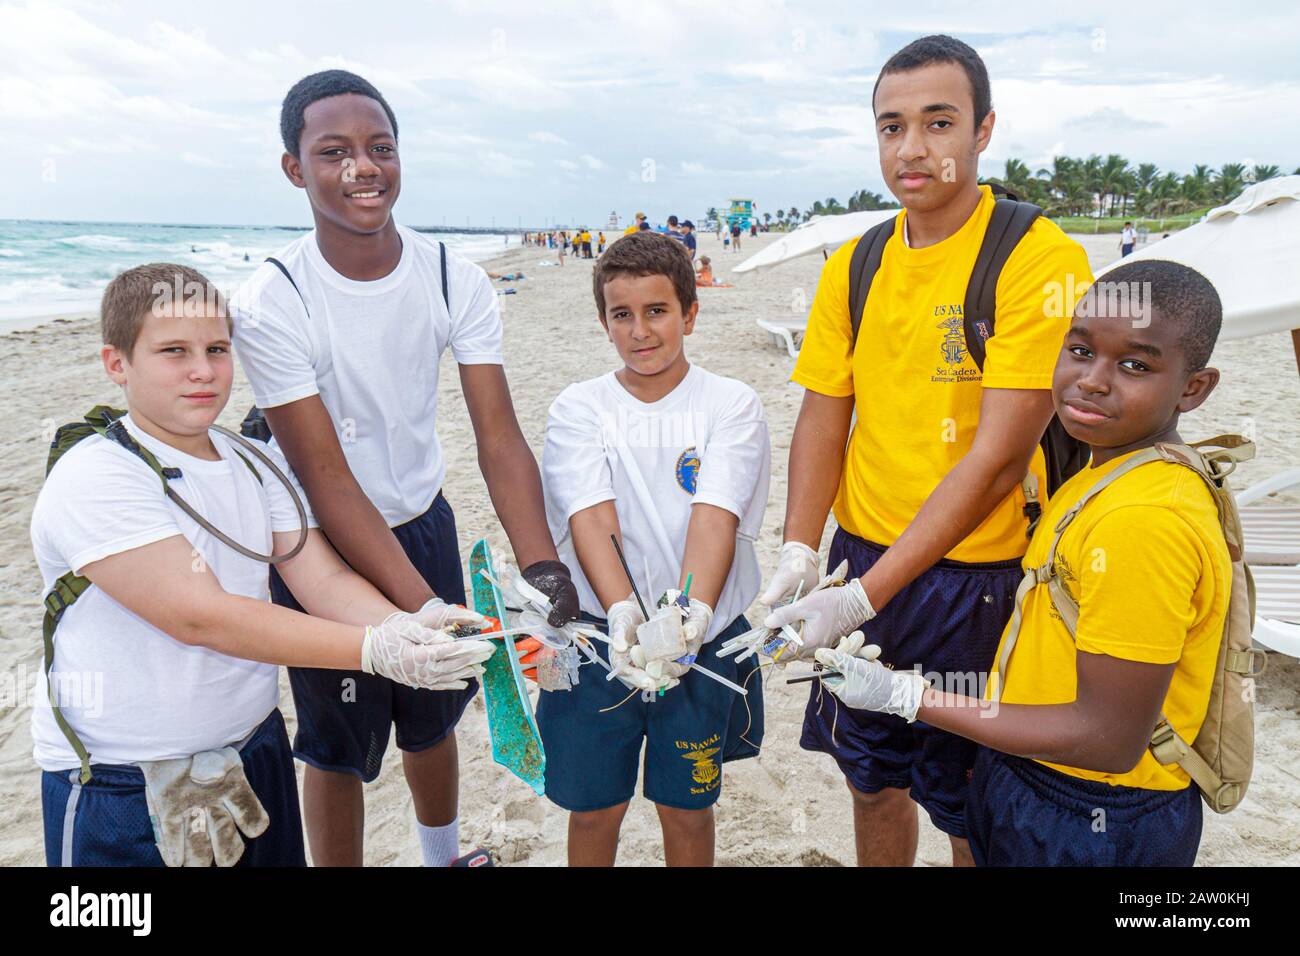 Miami Beach Florida,Coastal Cleanup Day,volunteer volunteers volunteering work worker workers,working together serving help,helping litter,trash,pollu Stock Photo